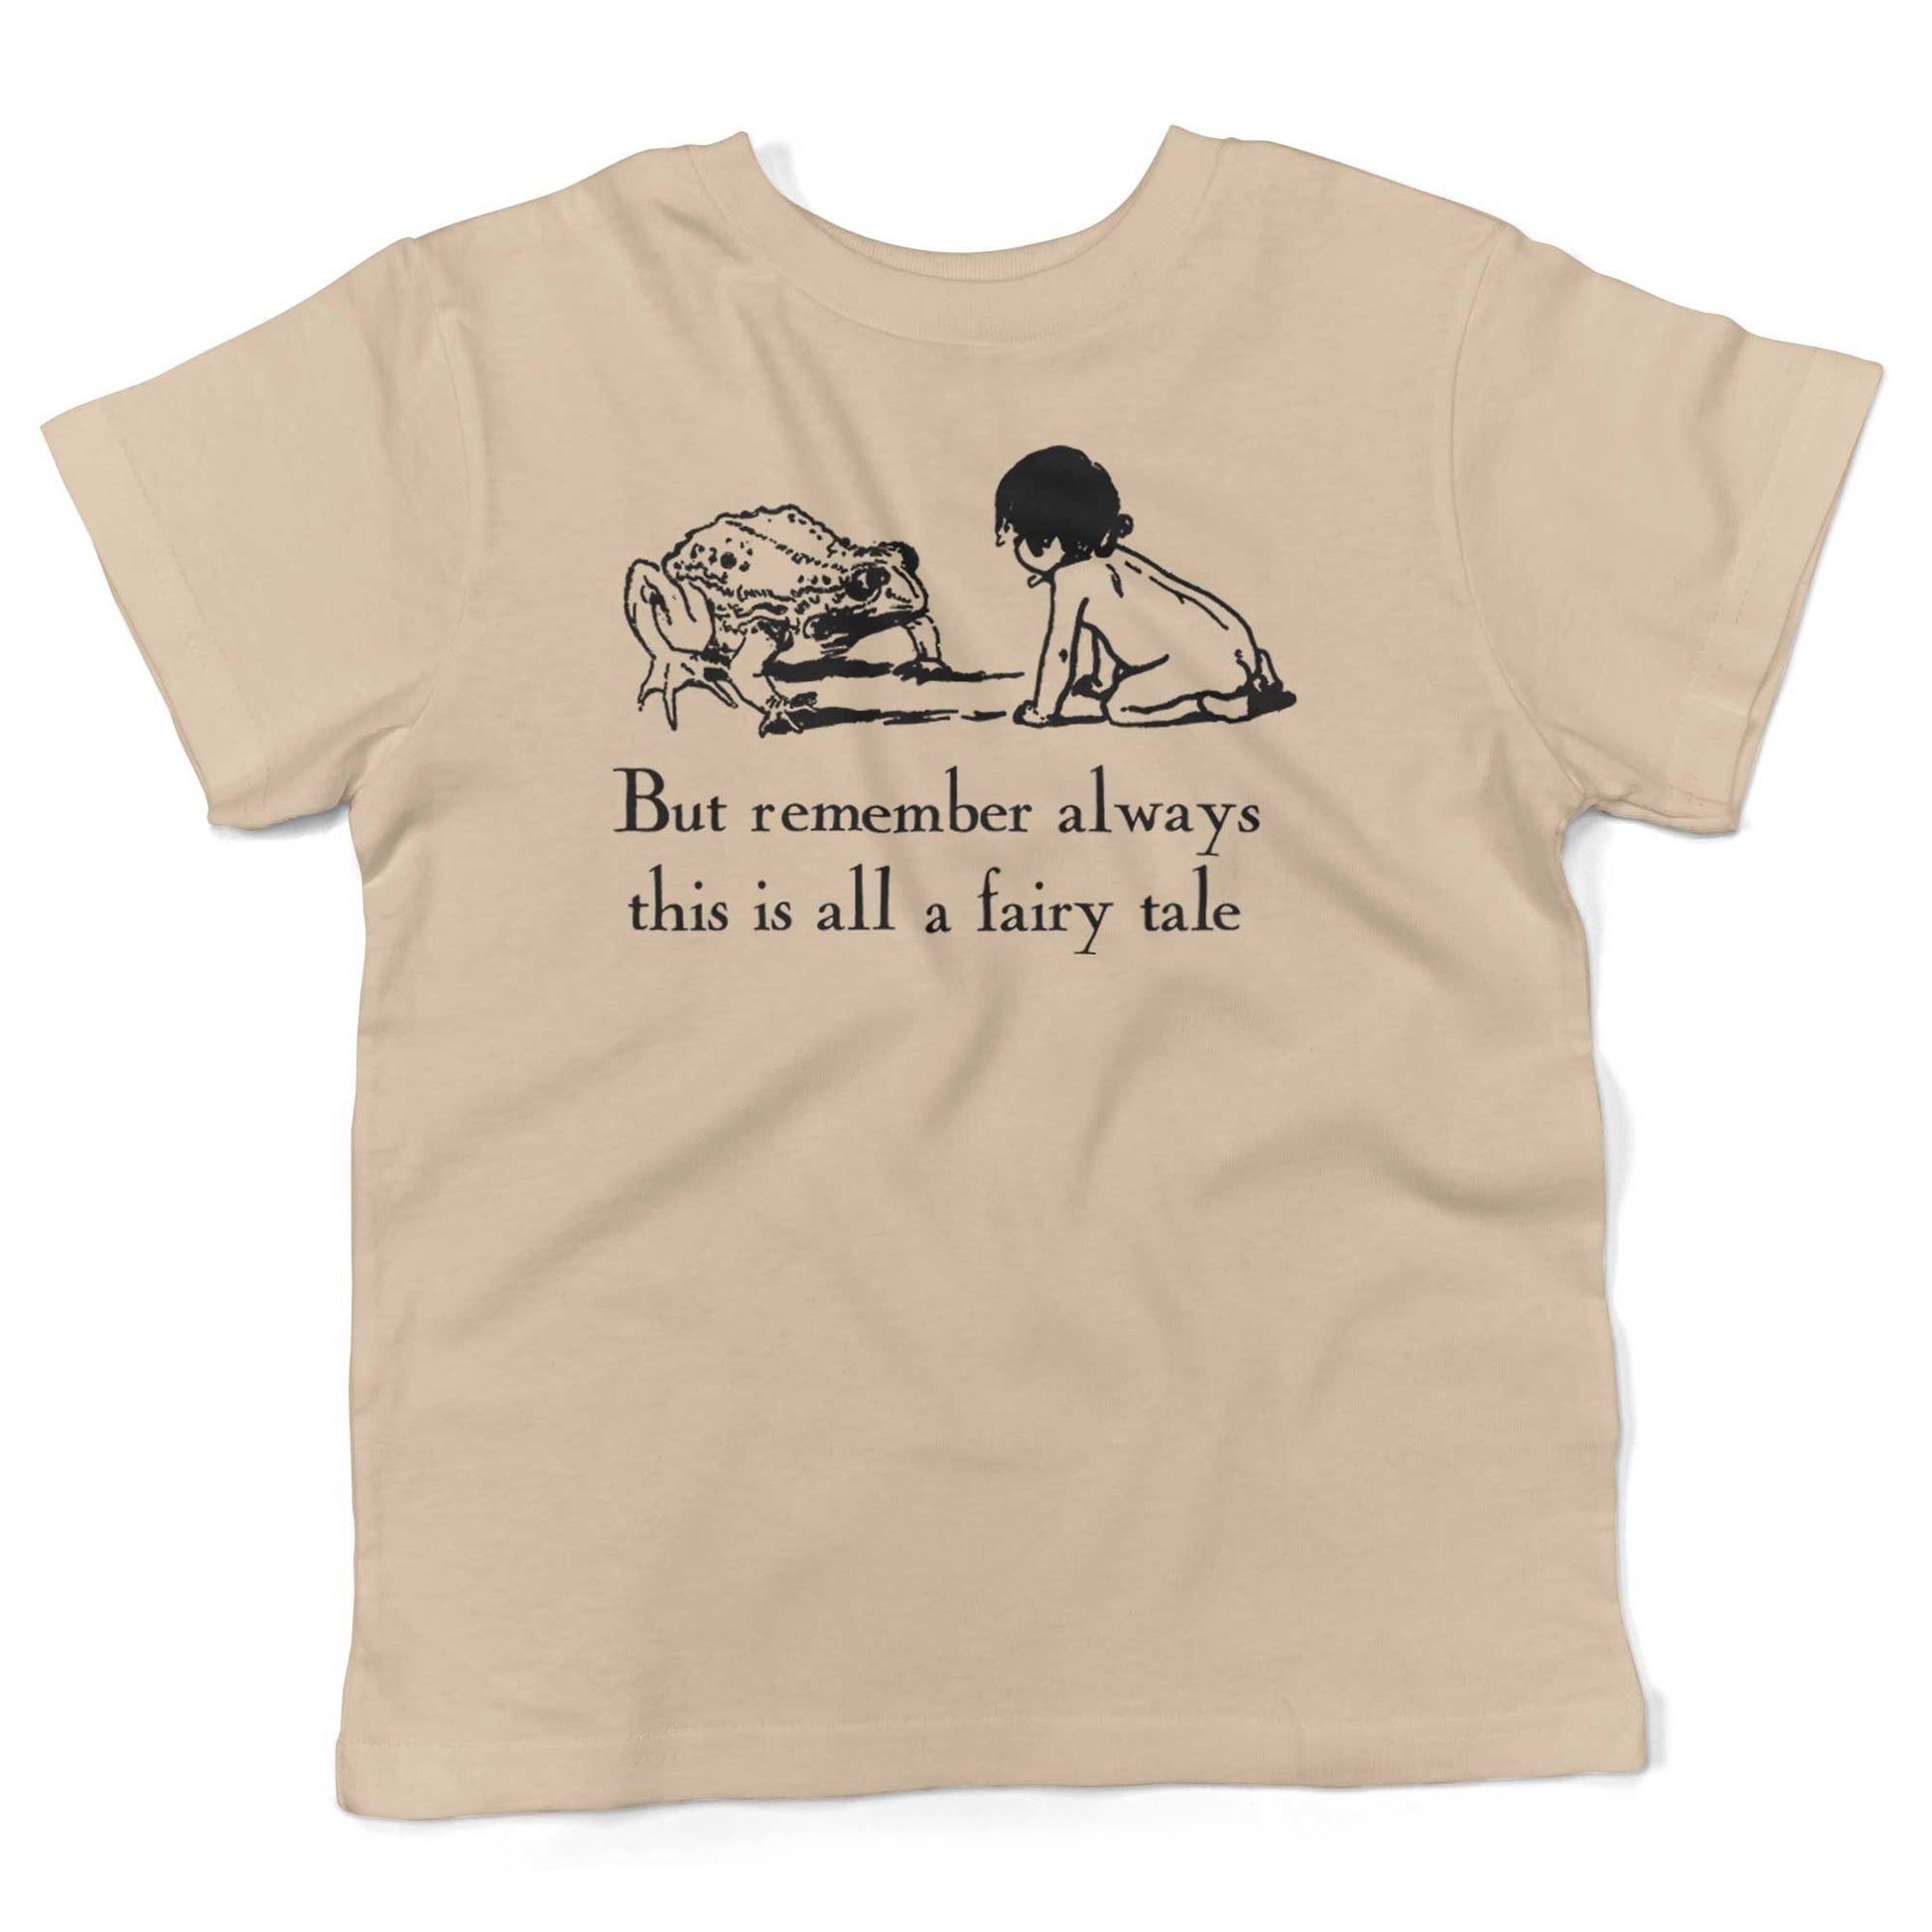 But remember always this is all a fairy tale Toddler Shirt-Organic Natural-2T